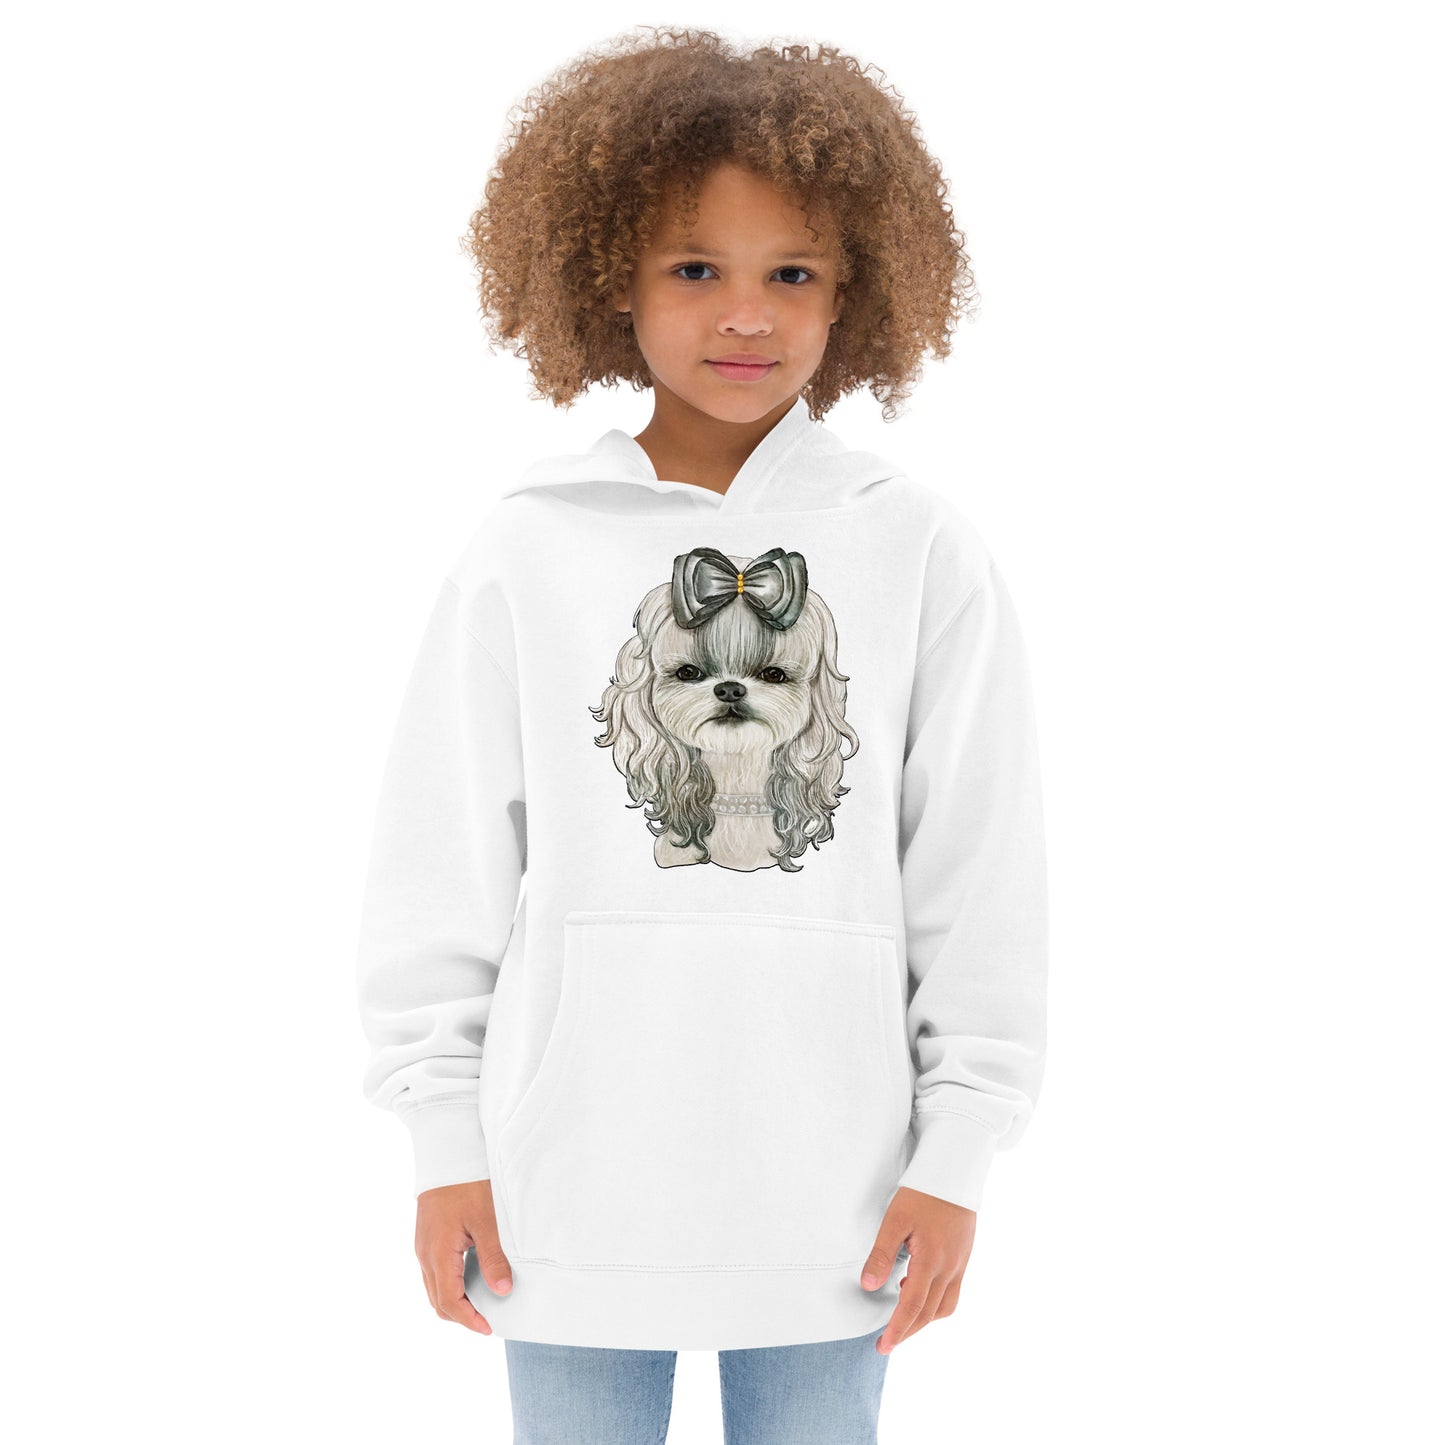 Adorable Dog with White Hair Ribbon Hoodie, No. 0567